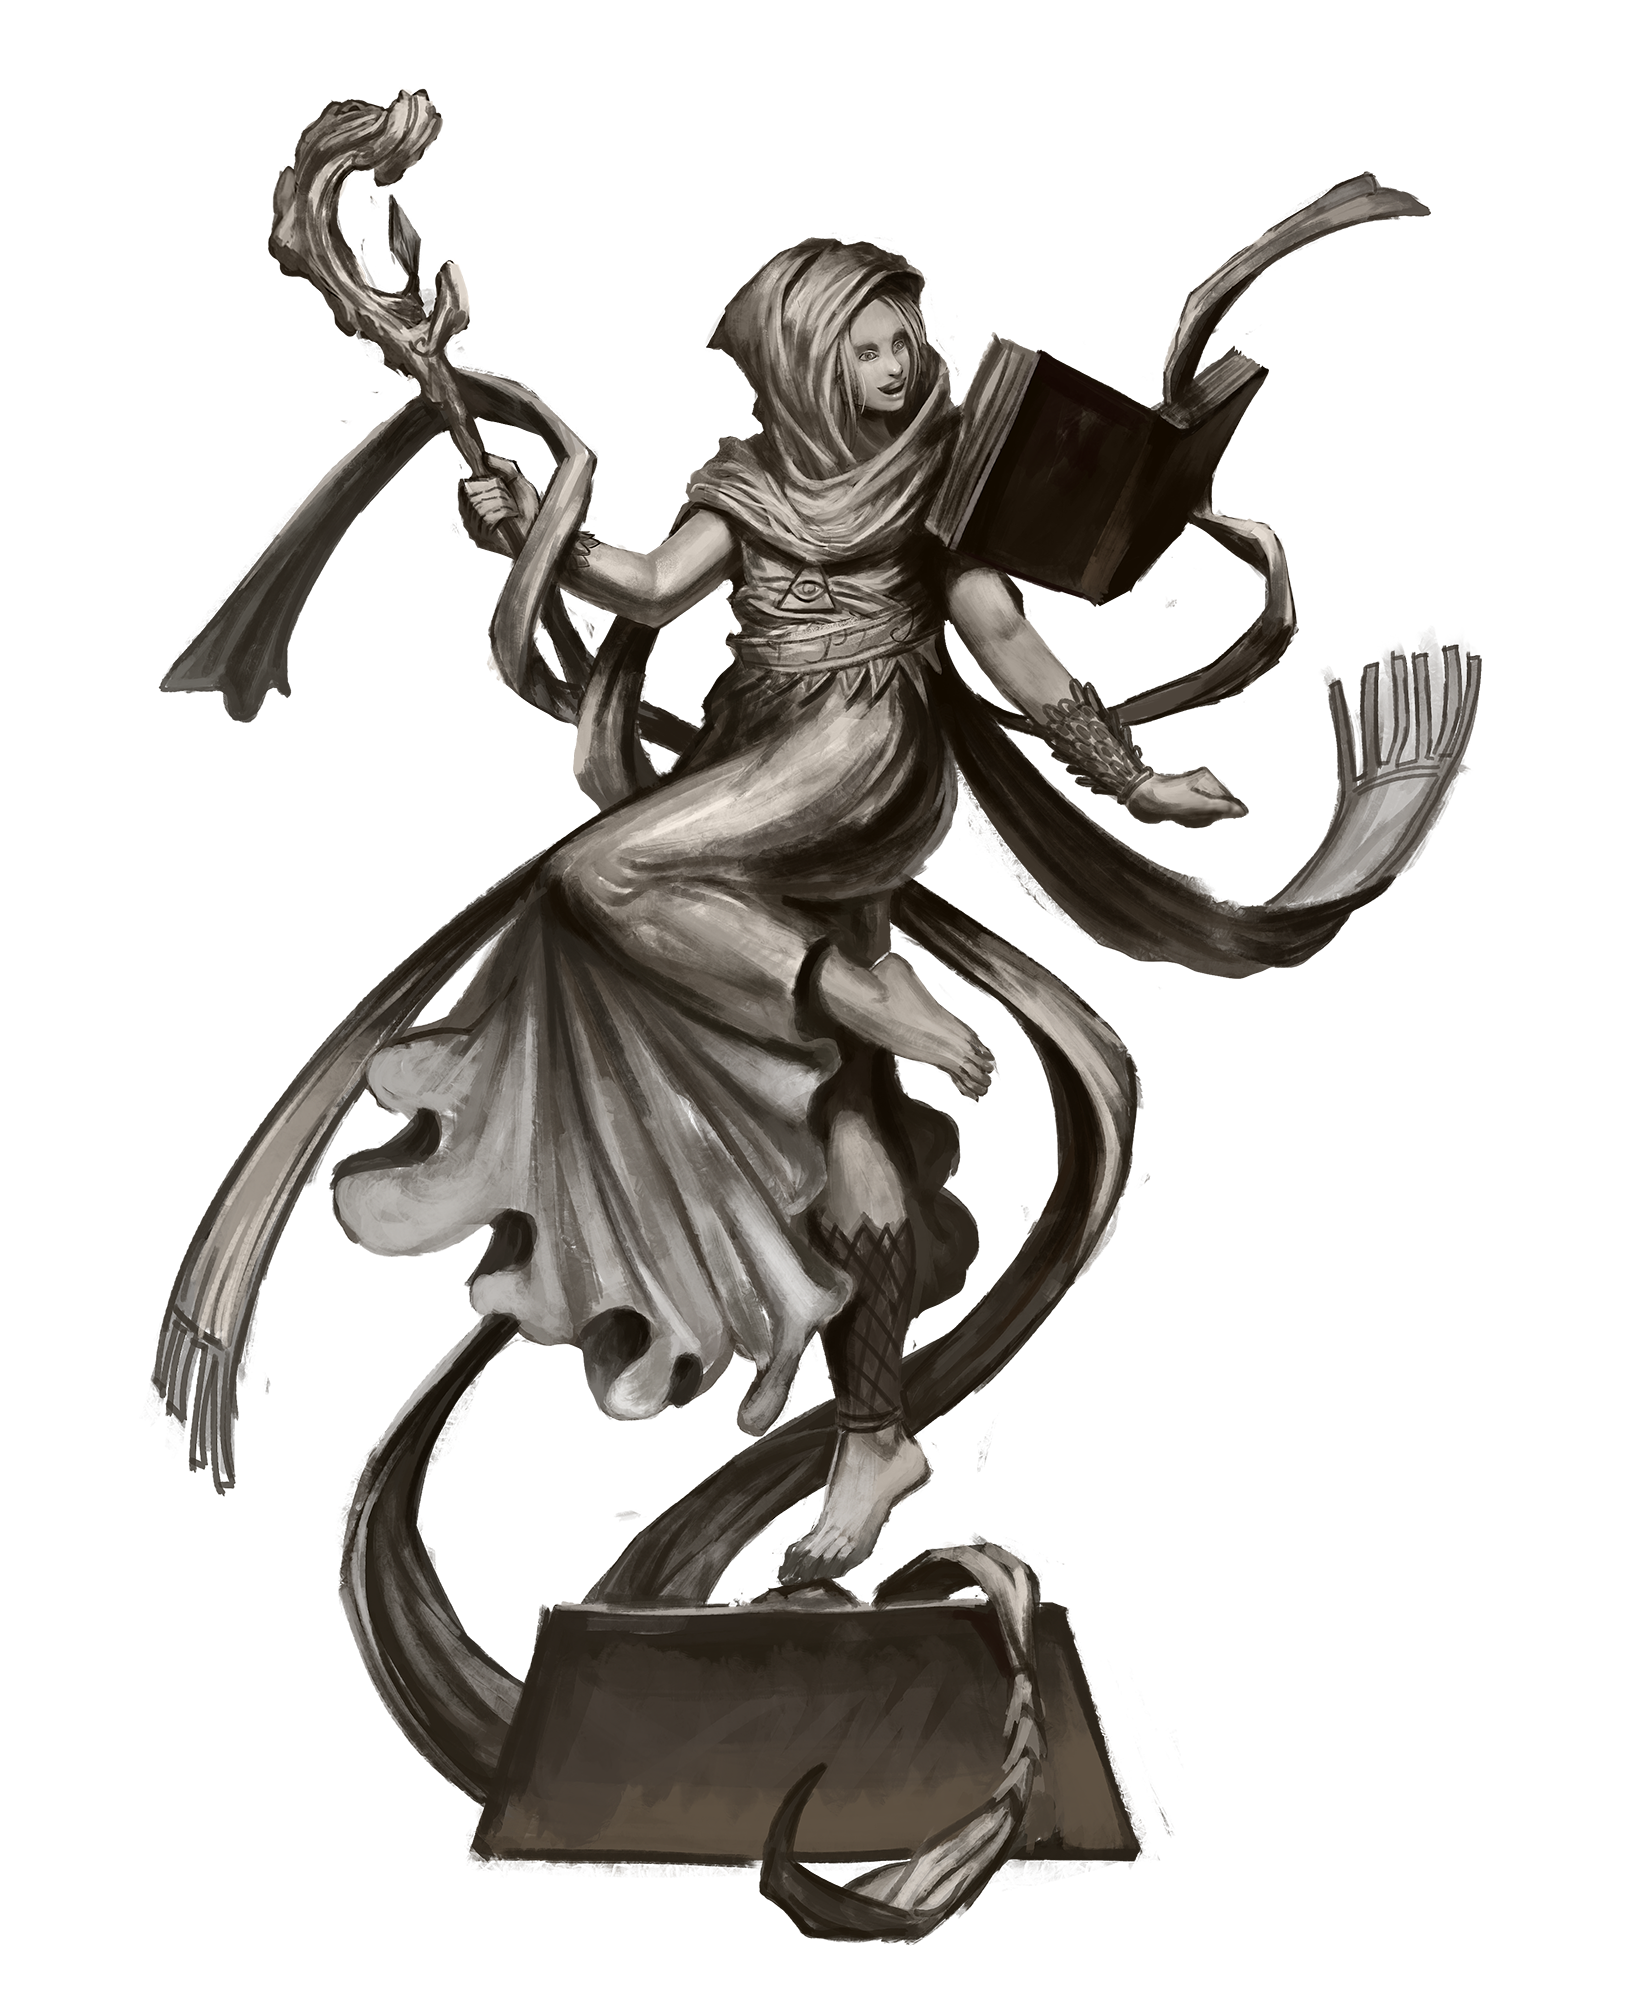 A statue of a slightly younger Alyreha, looking overjoyed and holding a large, elaborate spellbook. She’s posed as if in mid-dance, holding a staff and barefoot.